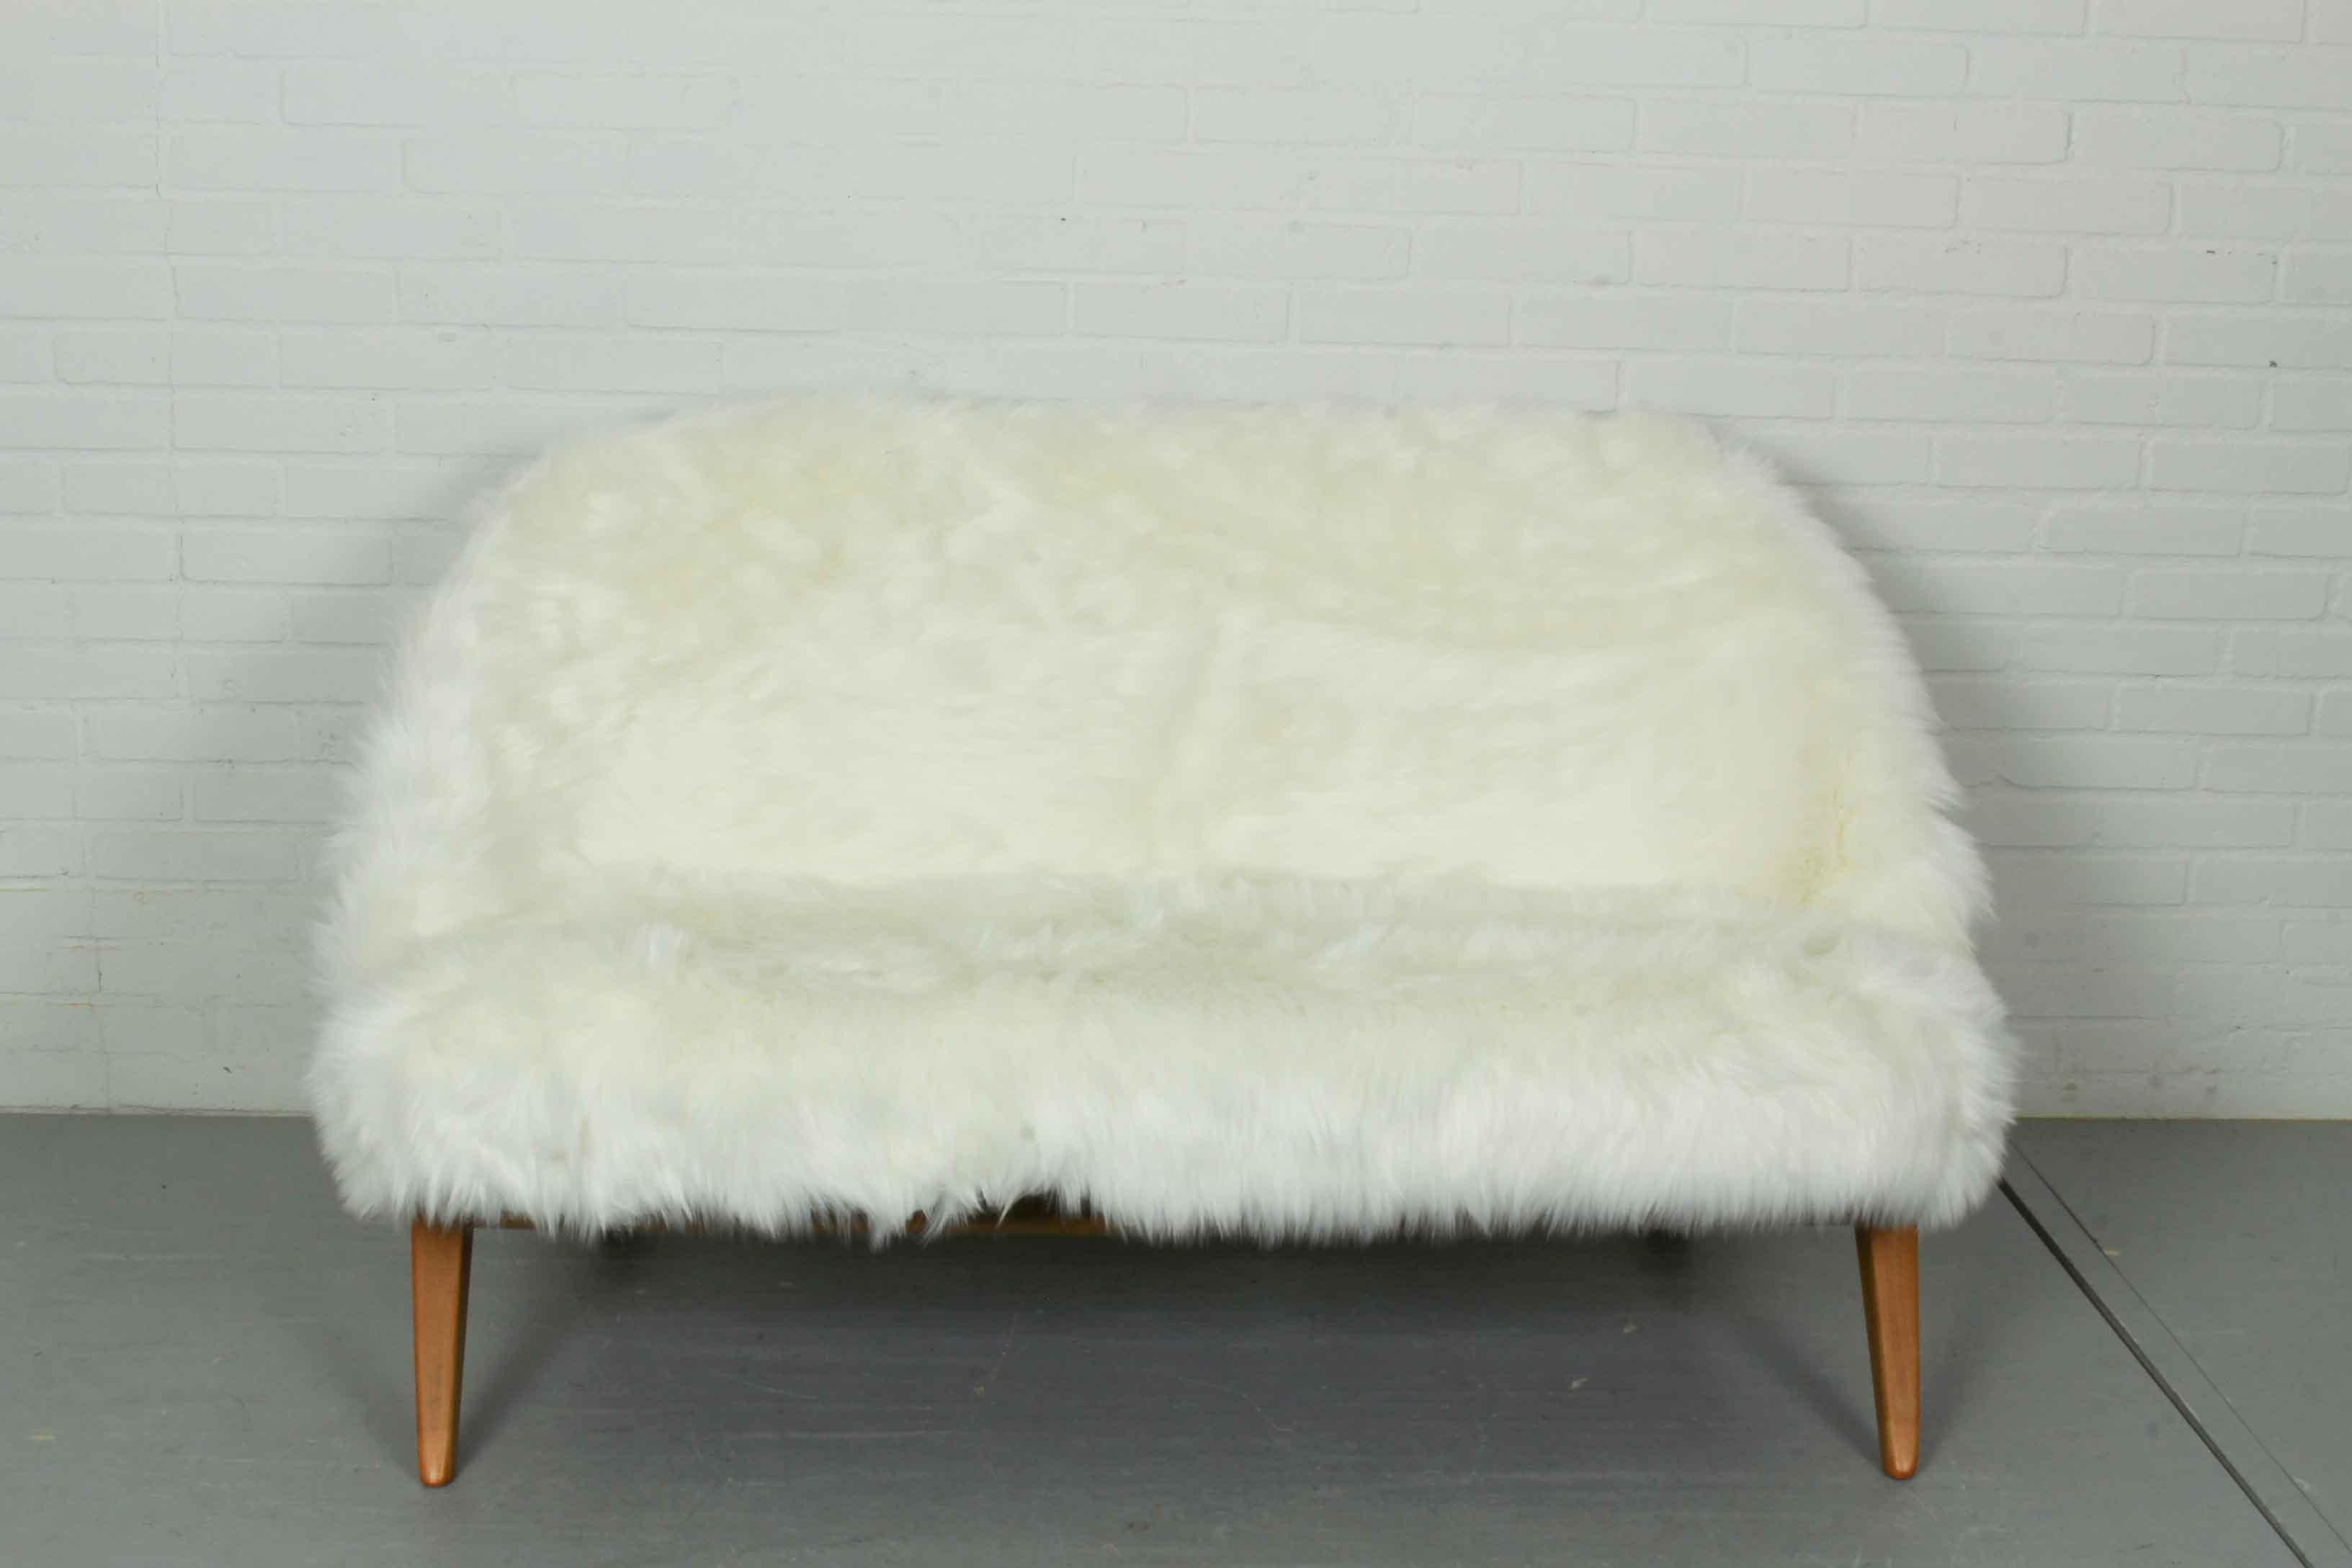 Sofa 'Congo' by Theo Ruth for Artifort, newly upholstered with Luxury Siberian long pile faux fur upholstery fabric The Netherlands, 1950s This Congo sofa is by Theo Ruth for Artifort. The back and the seat are seperate pieces that fit together in a